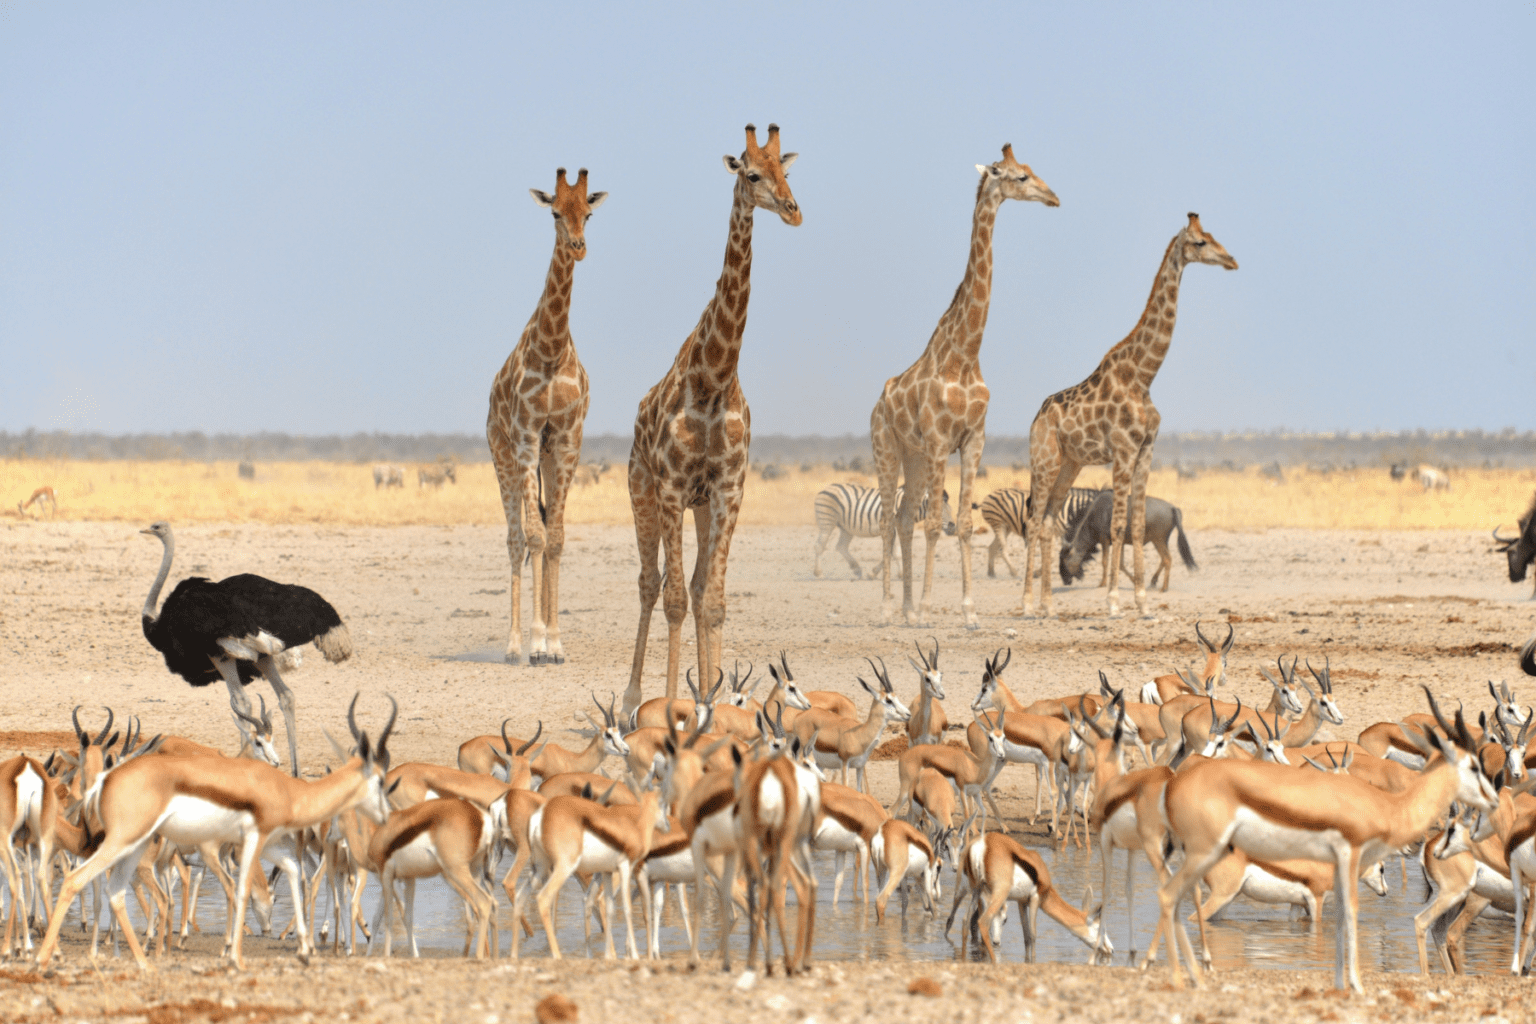 A herd of giraffes, ostrich, and kudu standing next to each other on a field.